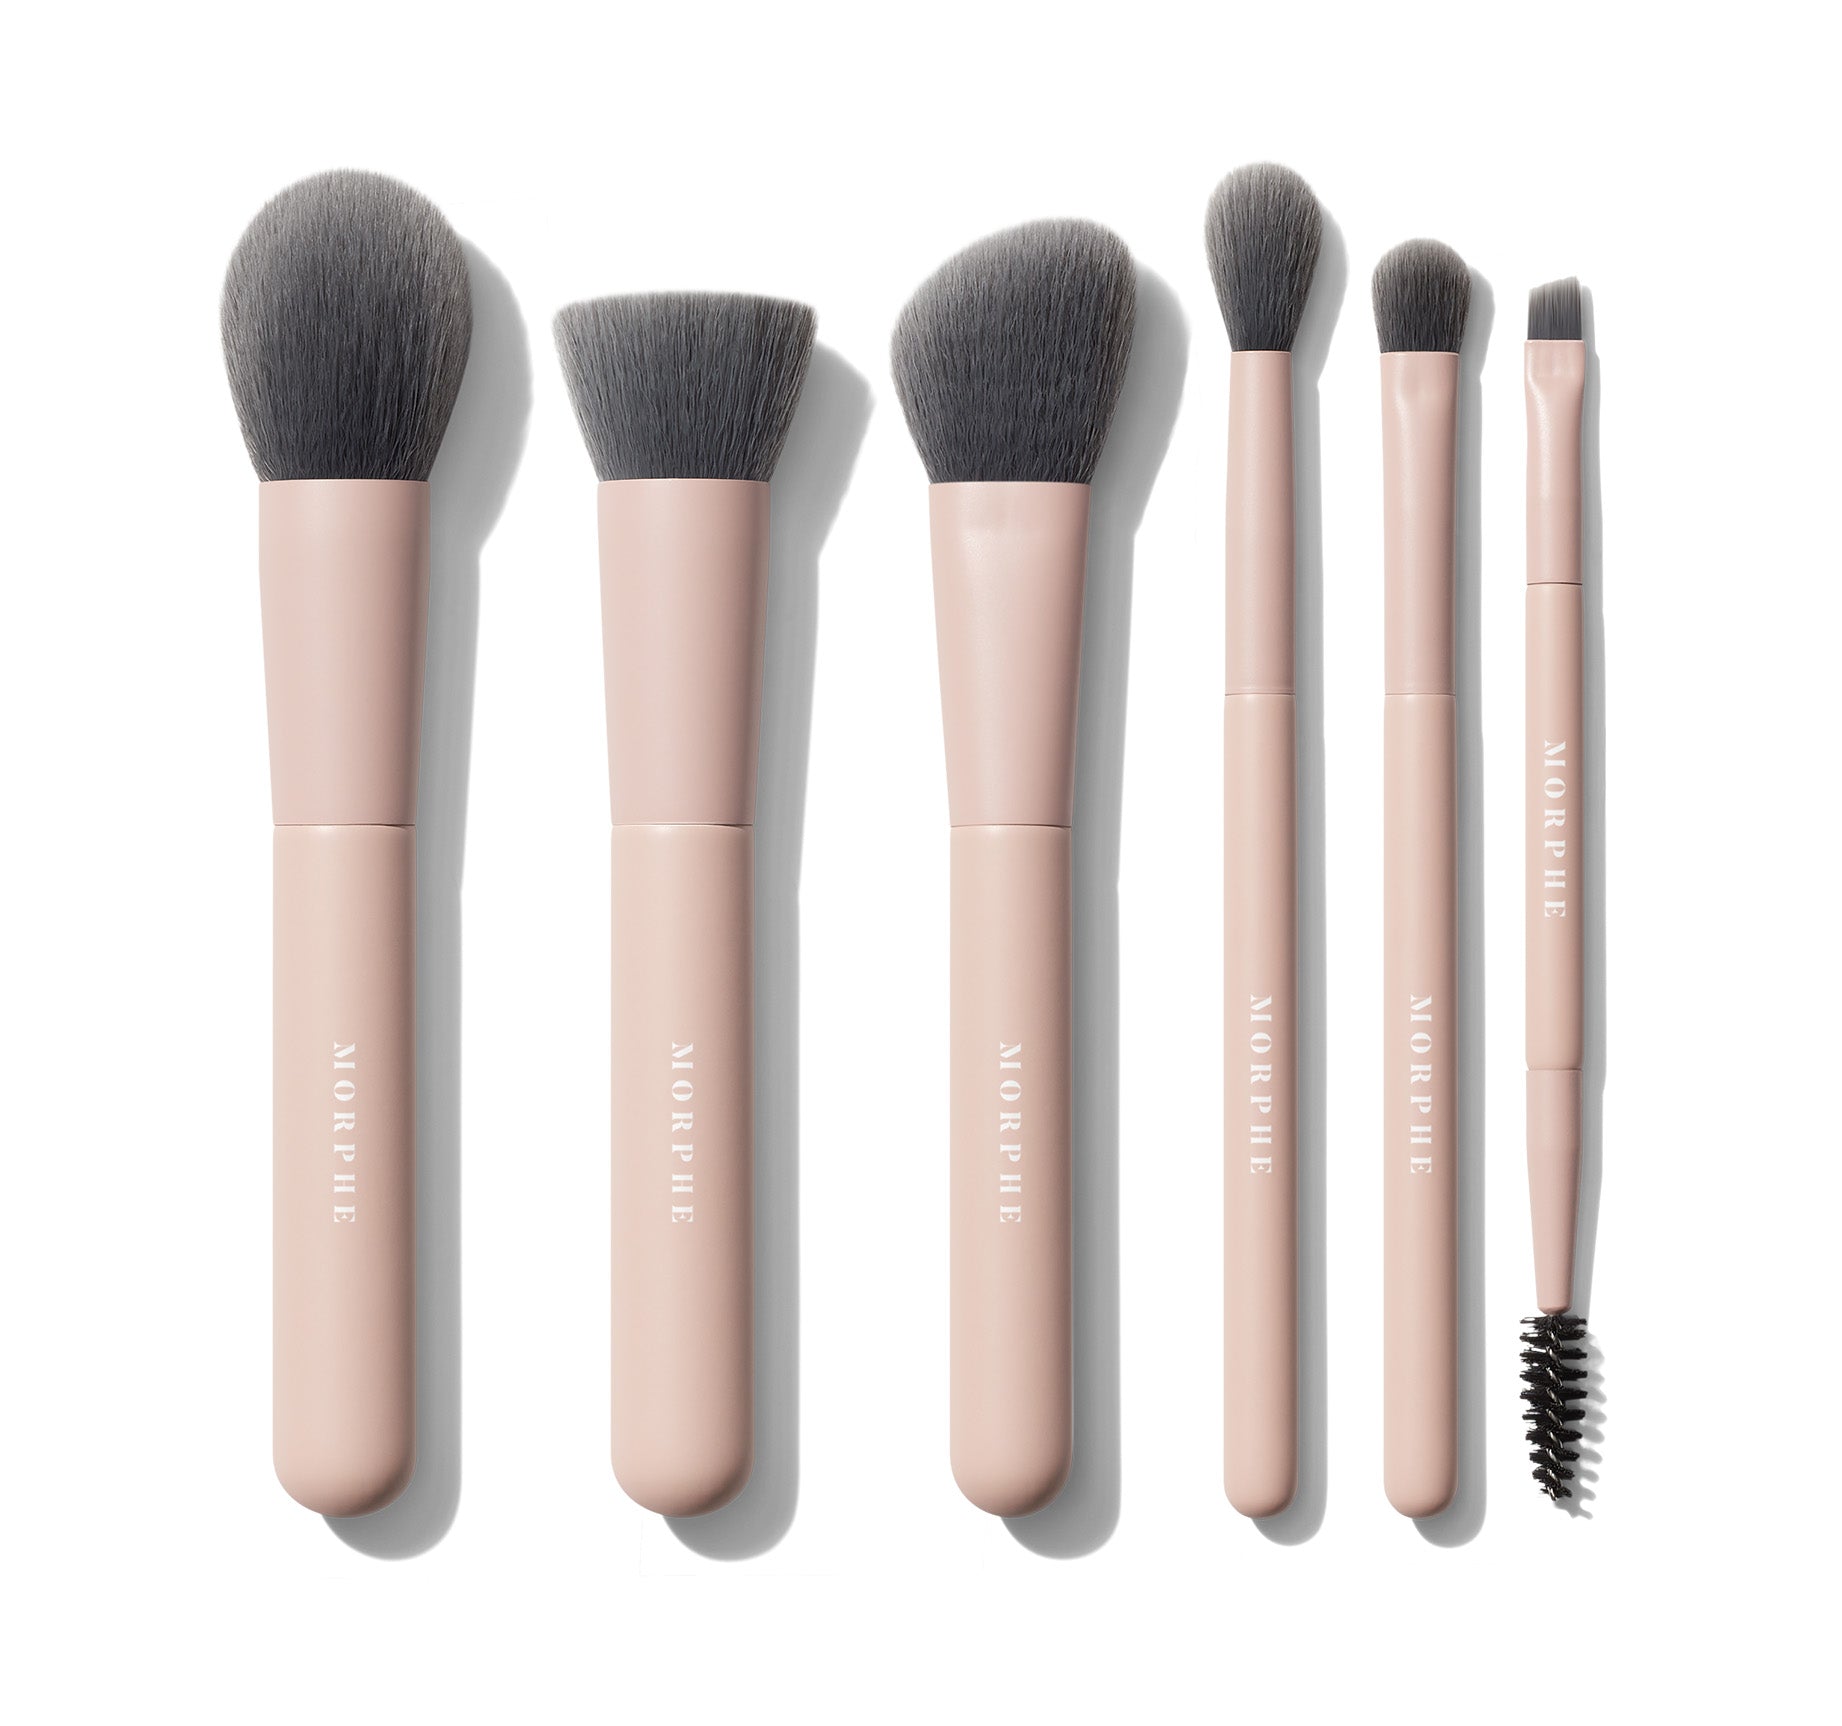 Travel Shaping Essentials Bamboo & Charcoal Infused Travel Brush Set - Image 5